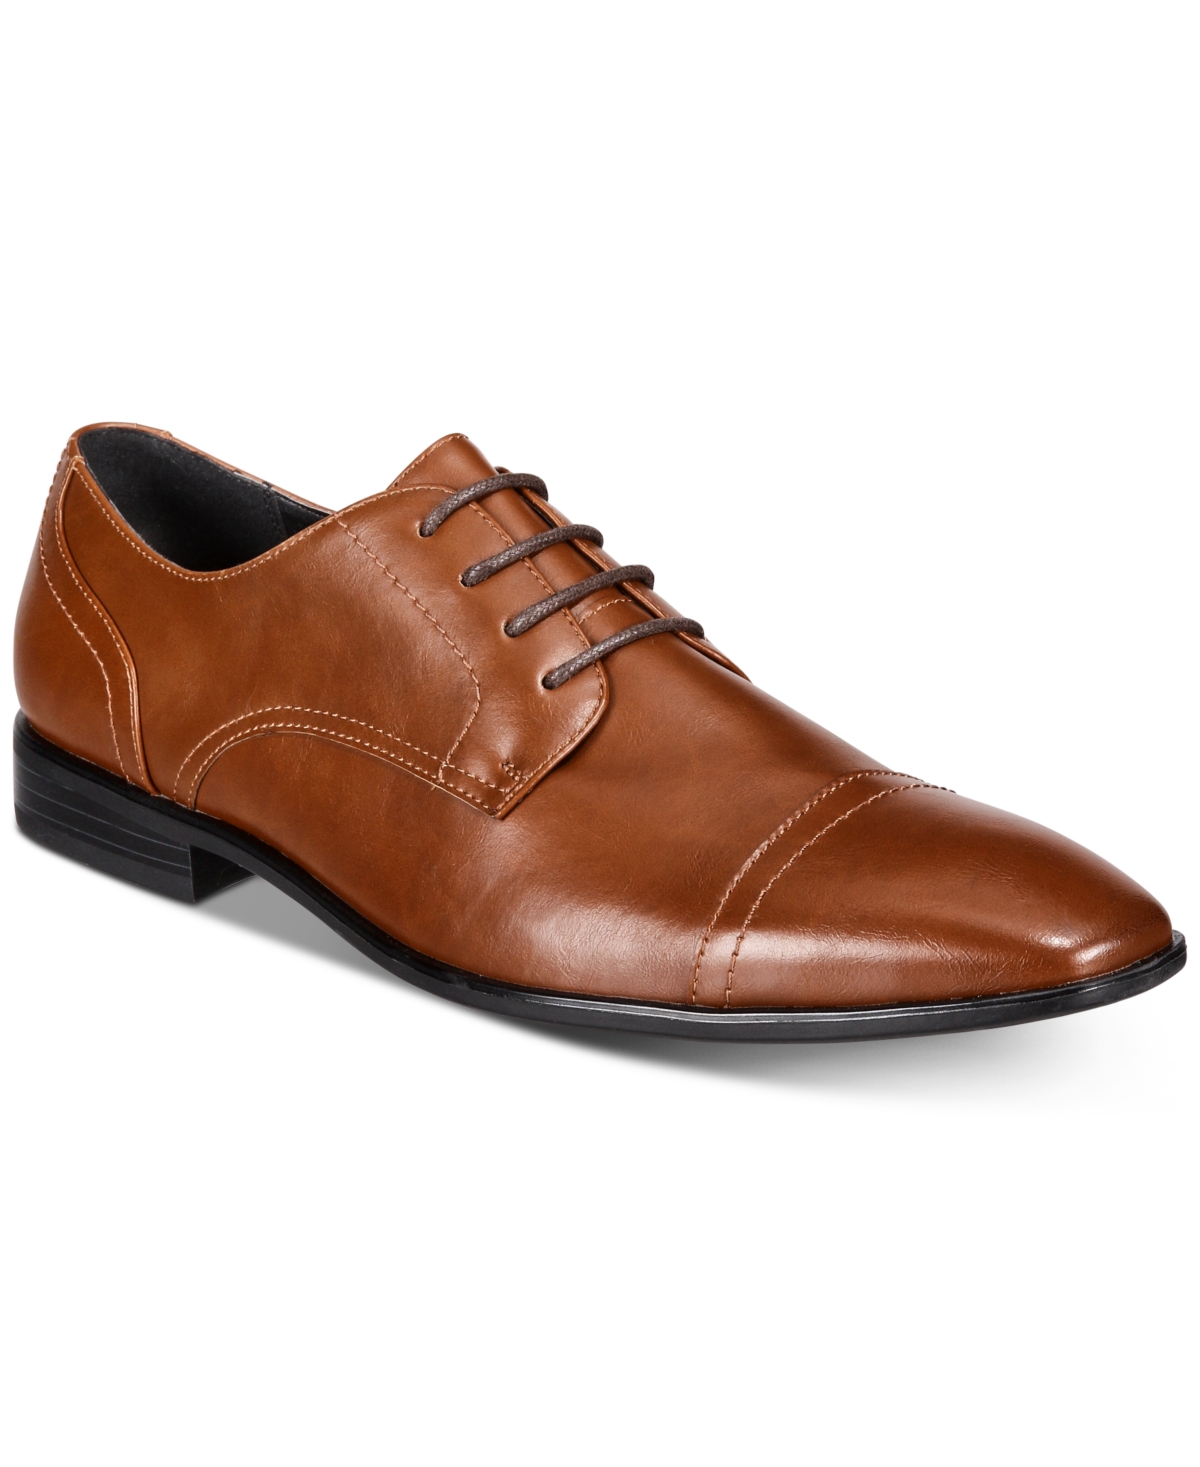 Men's Quincy Cap-Toe Lace-Up Shoes, Created for Macy's - Tan